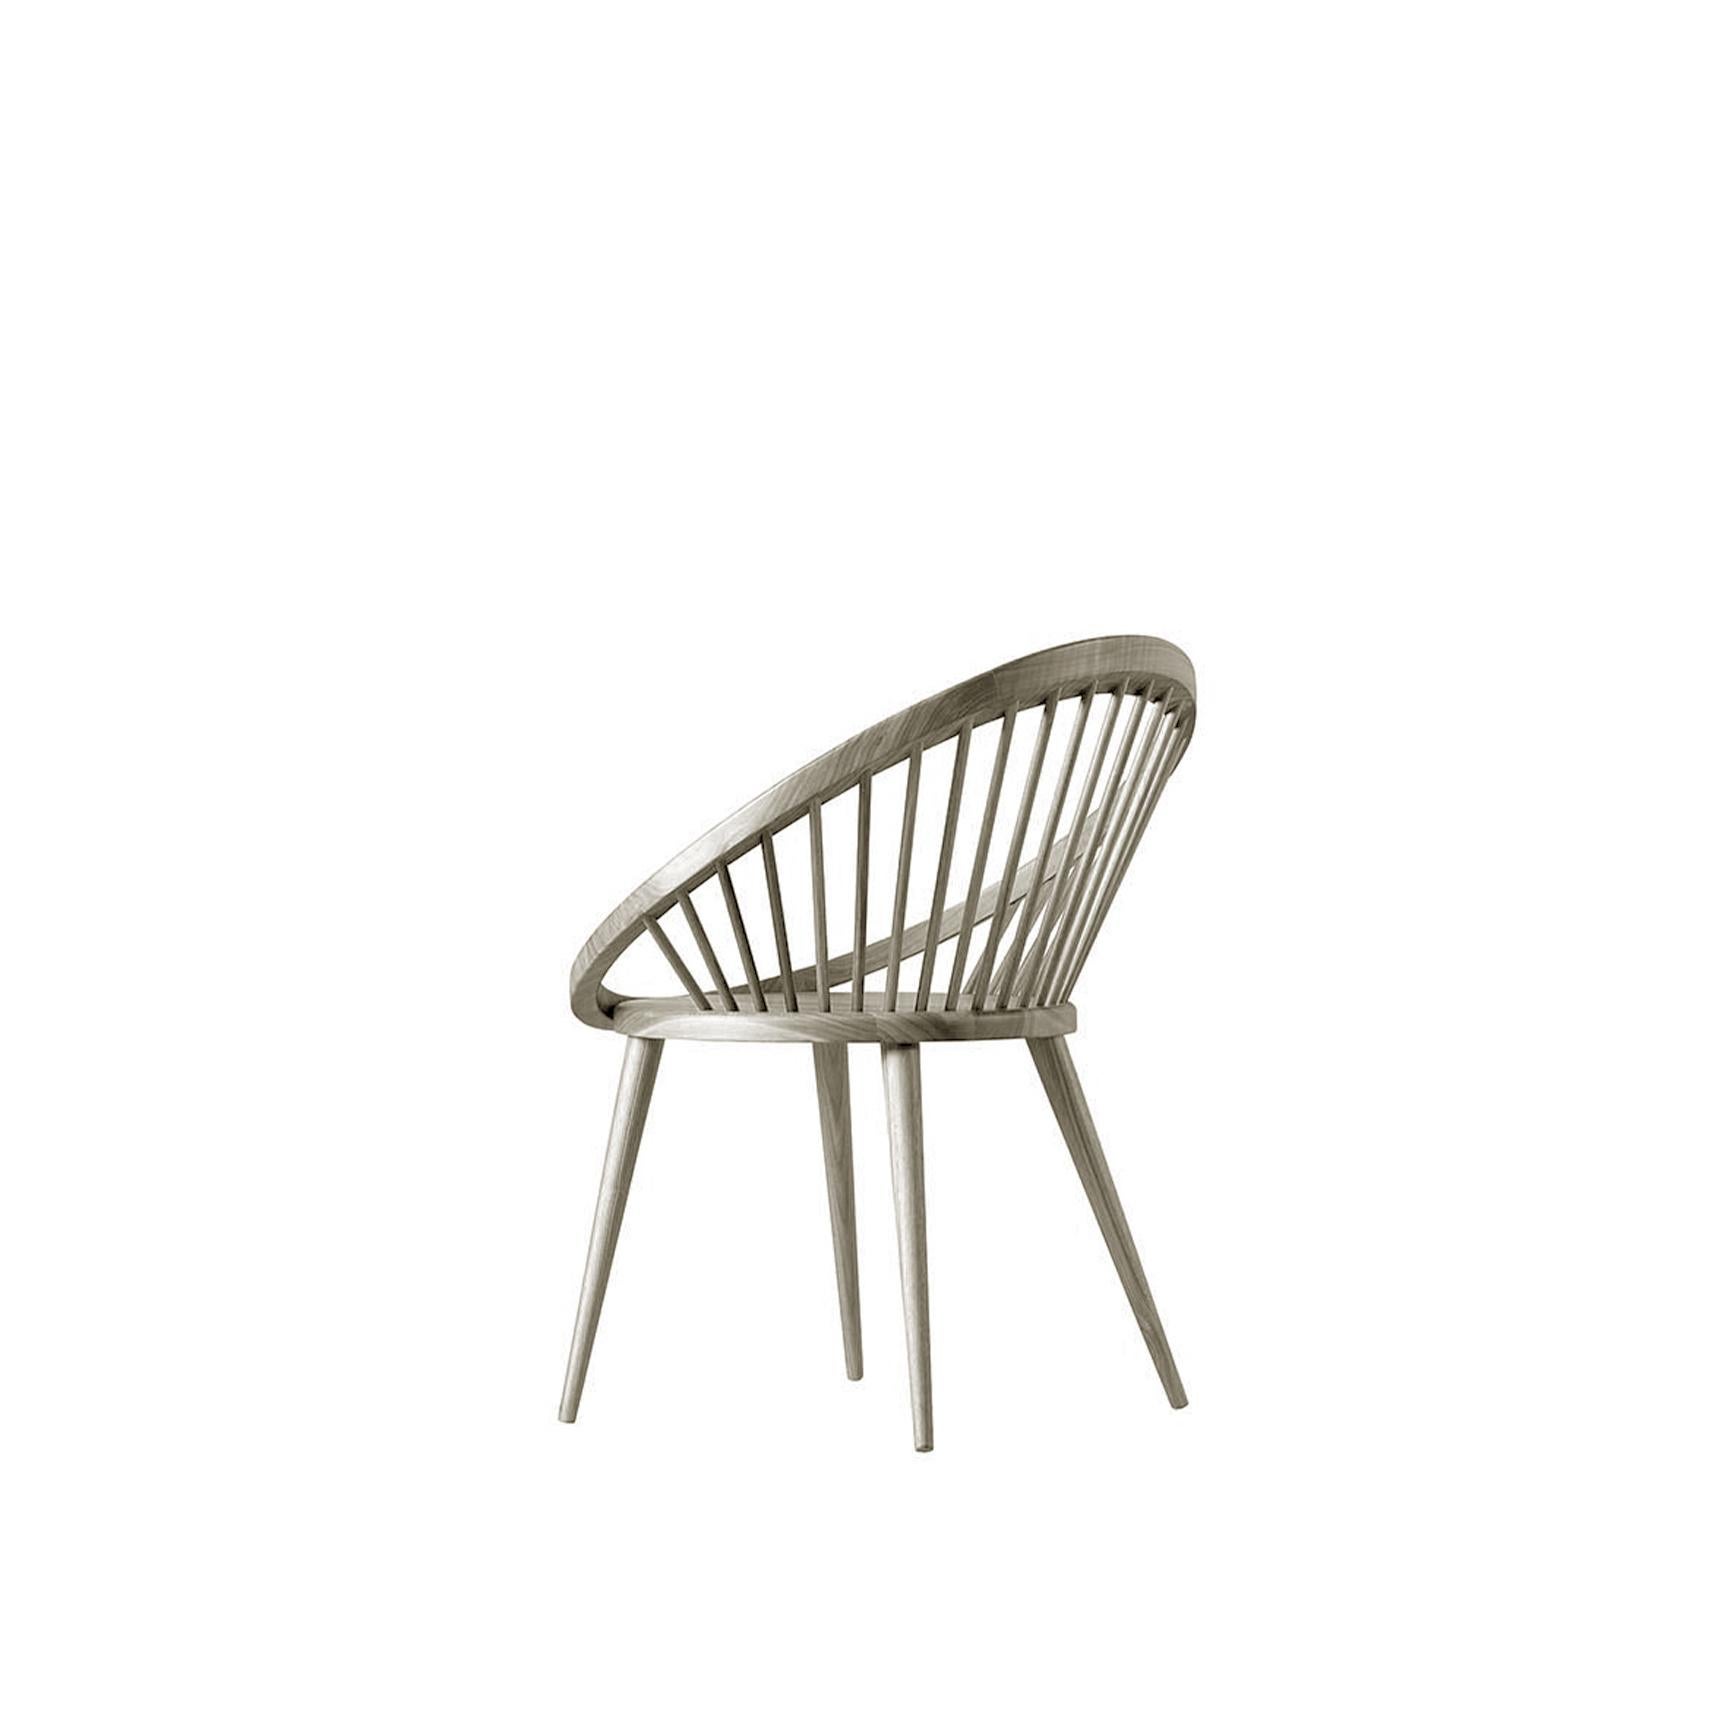 Italian Nido Solid Wood Chair, Walnut in Hand-Made Natural Grey Finish, Contemporary For Sale